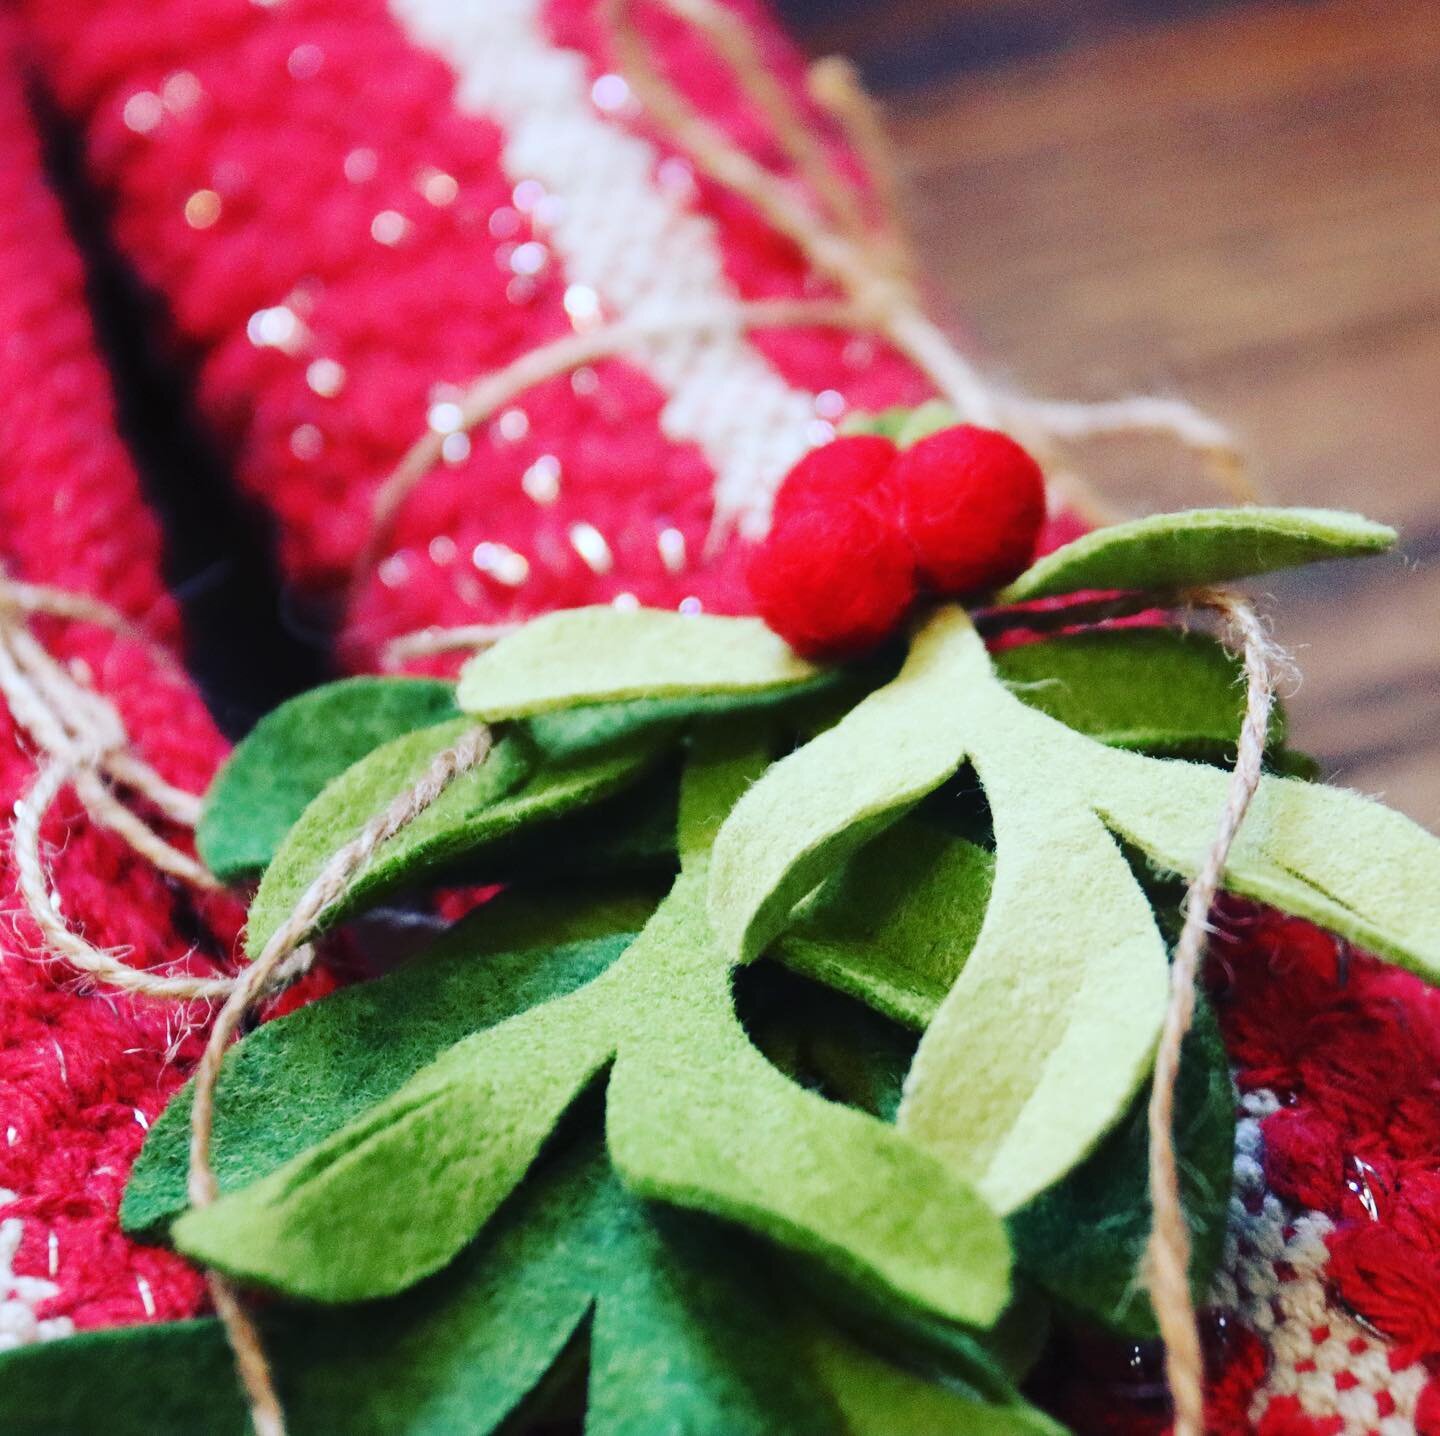 Love mistletoe, but have pets or kids at home? @feltupbygretchen has you covered! Beautiful placemats in the background from @dottiesflourshop. Have you invested in any local holiday decorations? Tell us in the comments! 🎄✨❄️